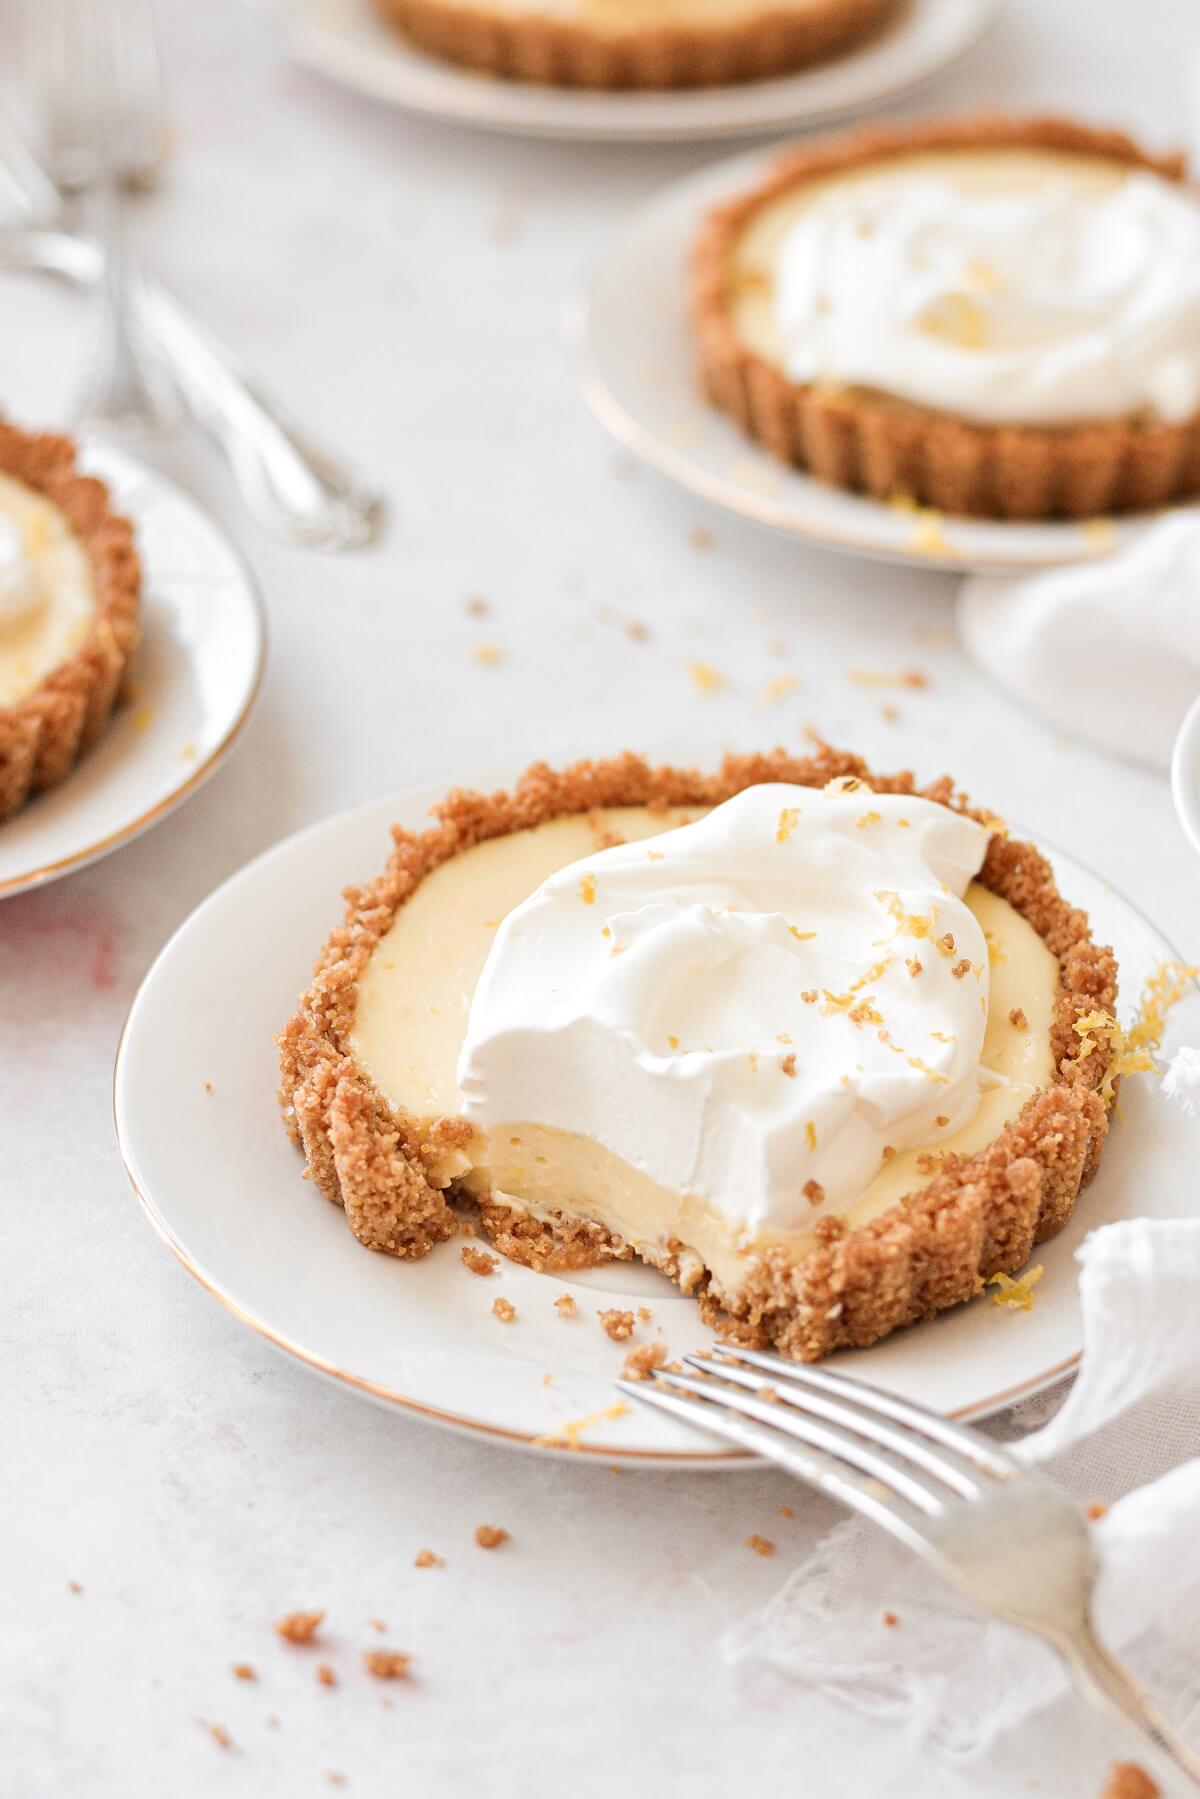 Lemon icebox pie, baked in individual lemon tarts, topped with whipped cream.